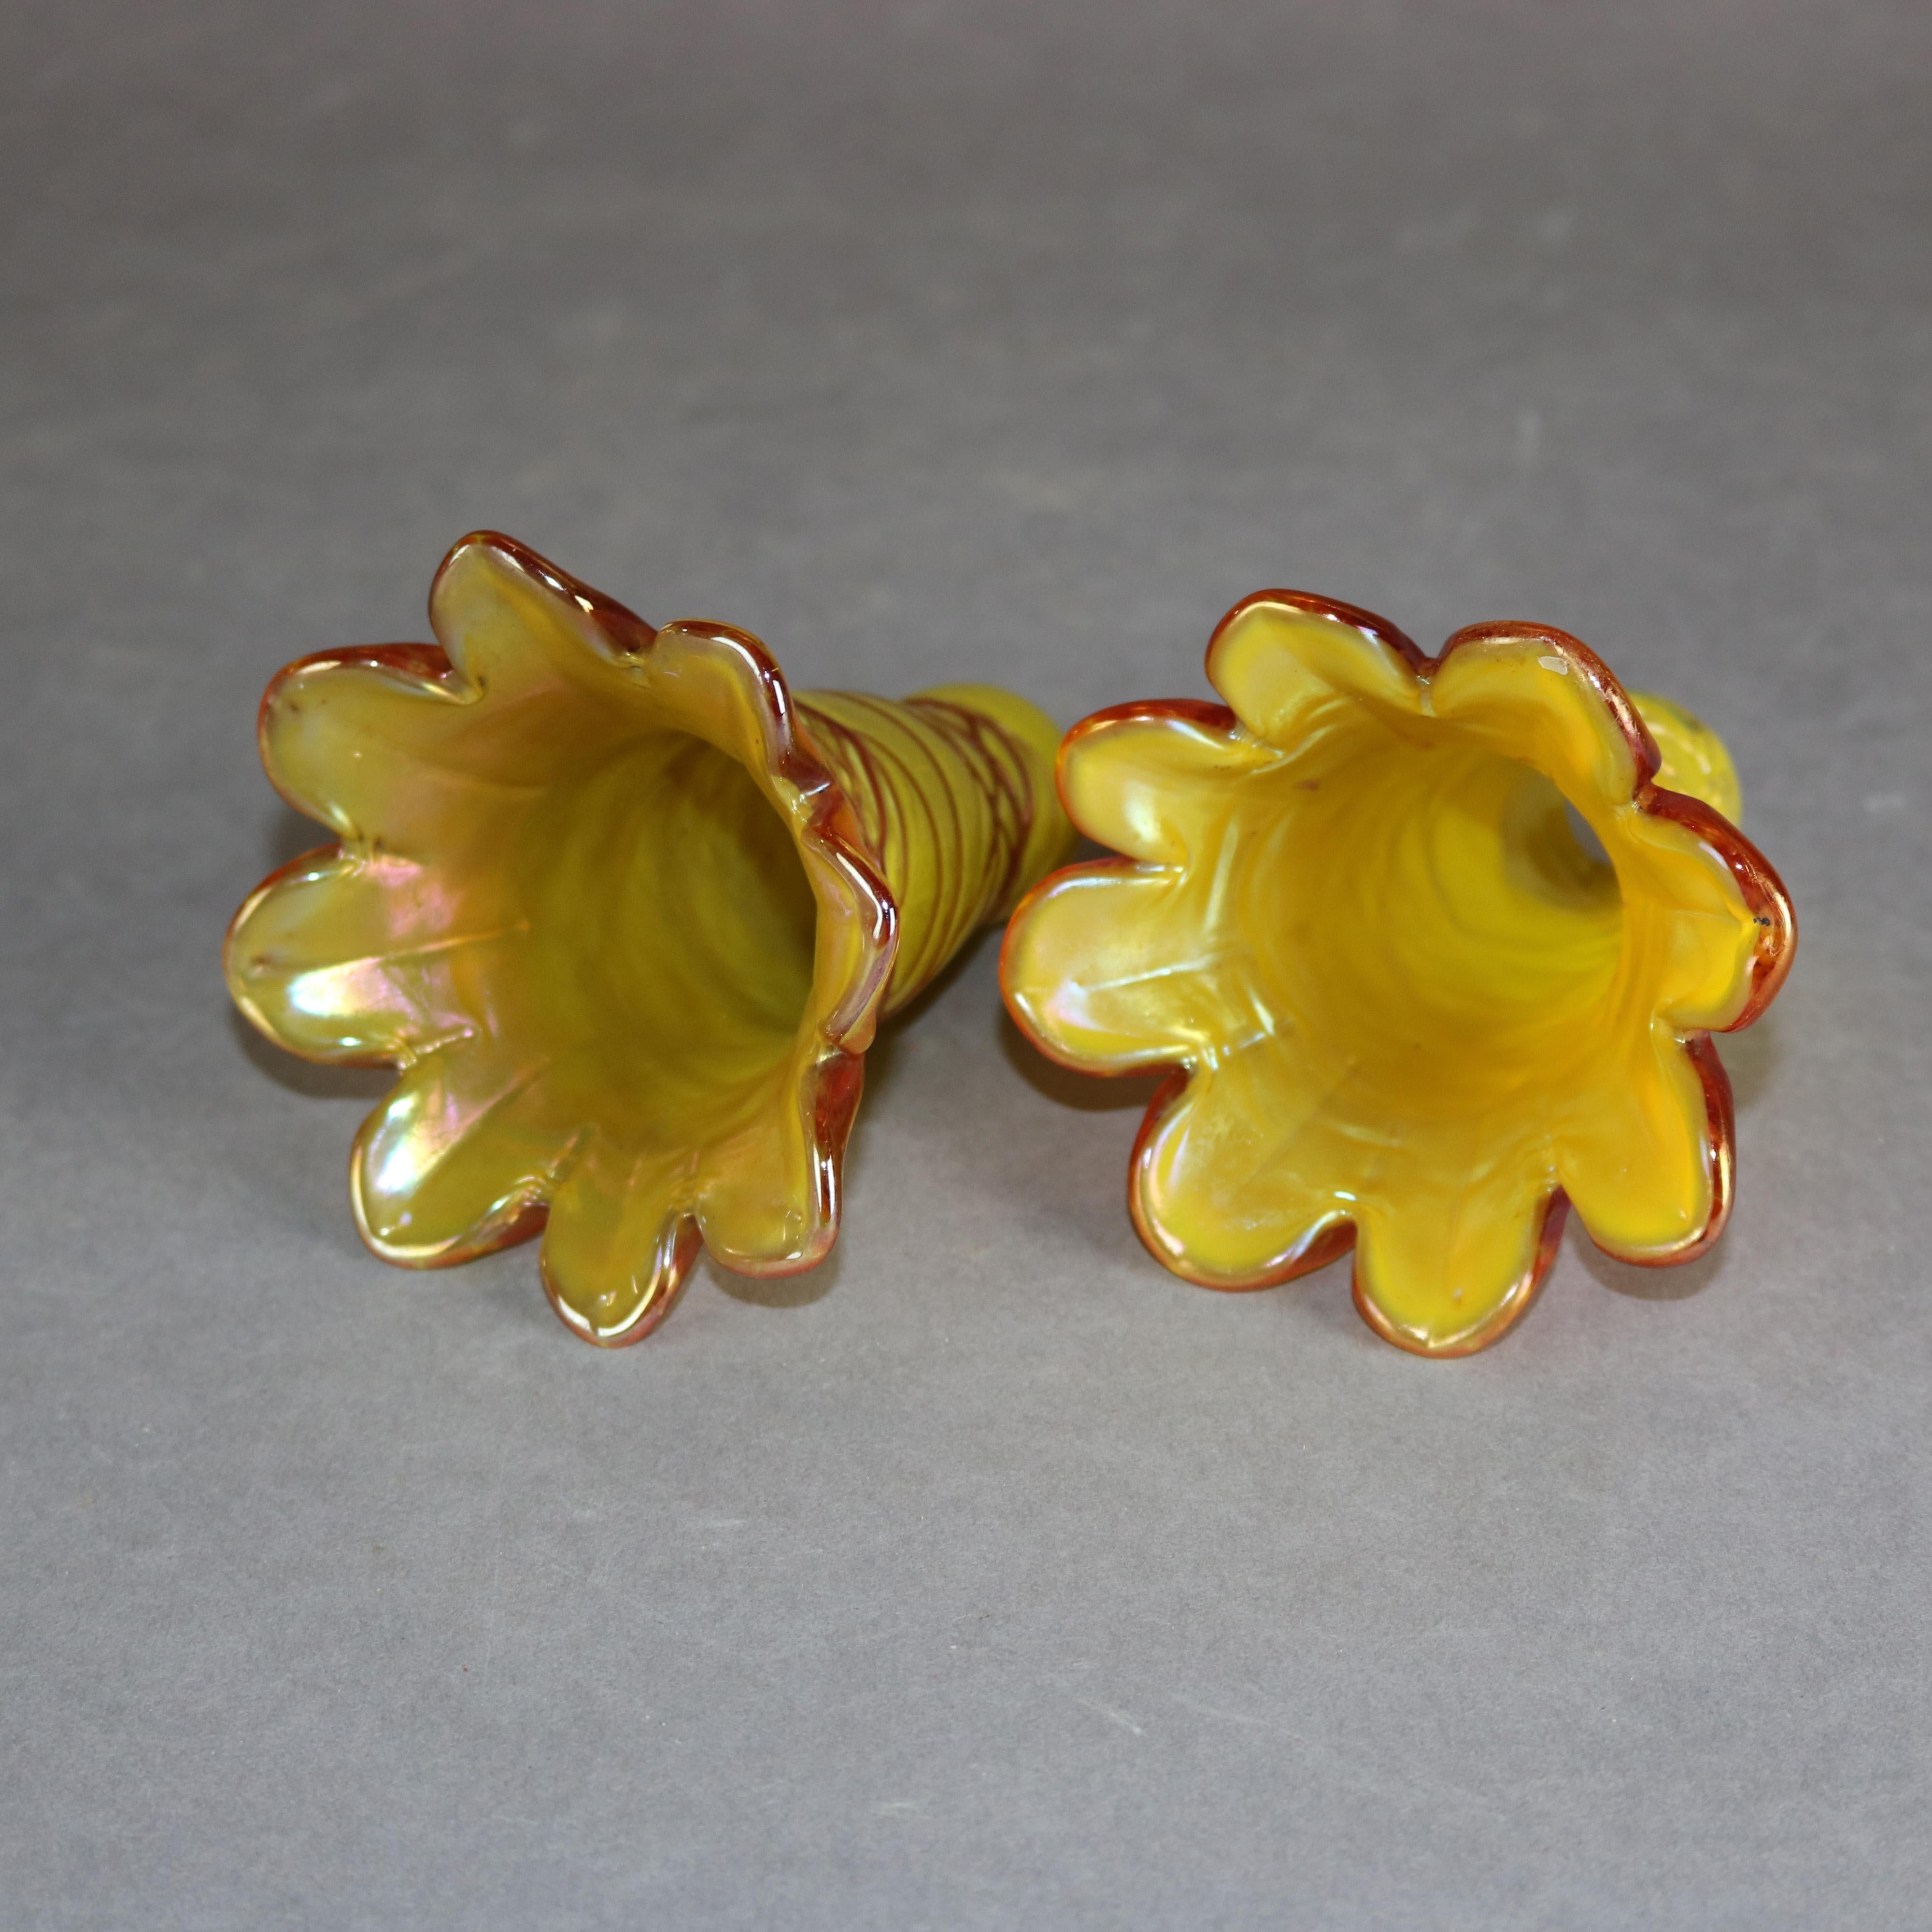 American Antique Pair of Threaded Art Glass Lily Shades, 20th Century